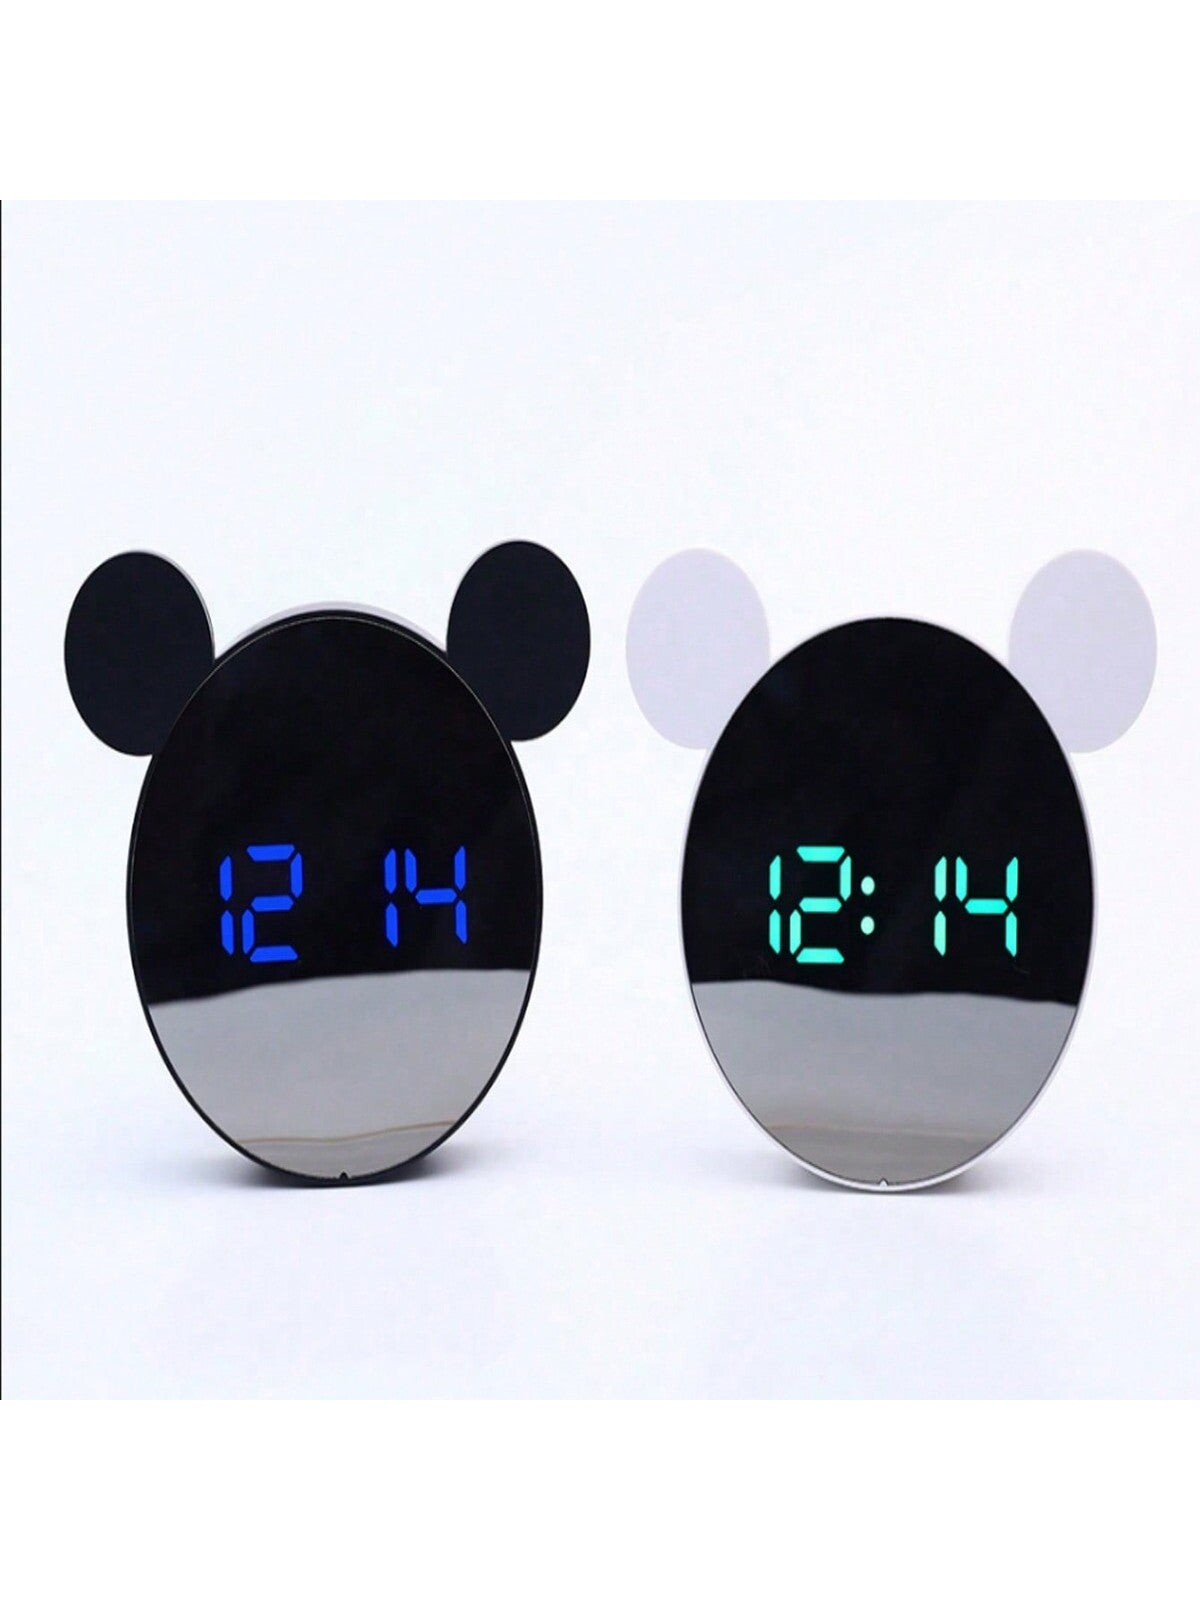 1pc Personalized New Led Digital Alarm Clock With Large Screen, Multifunction Clock & Temperature Display For Bedroom Decoration-Black-5